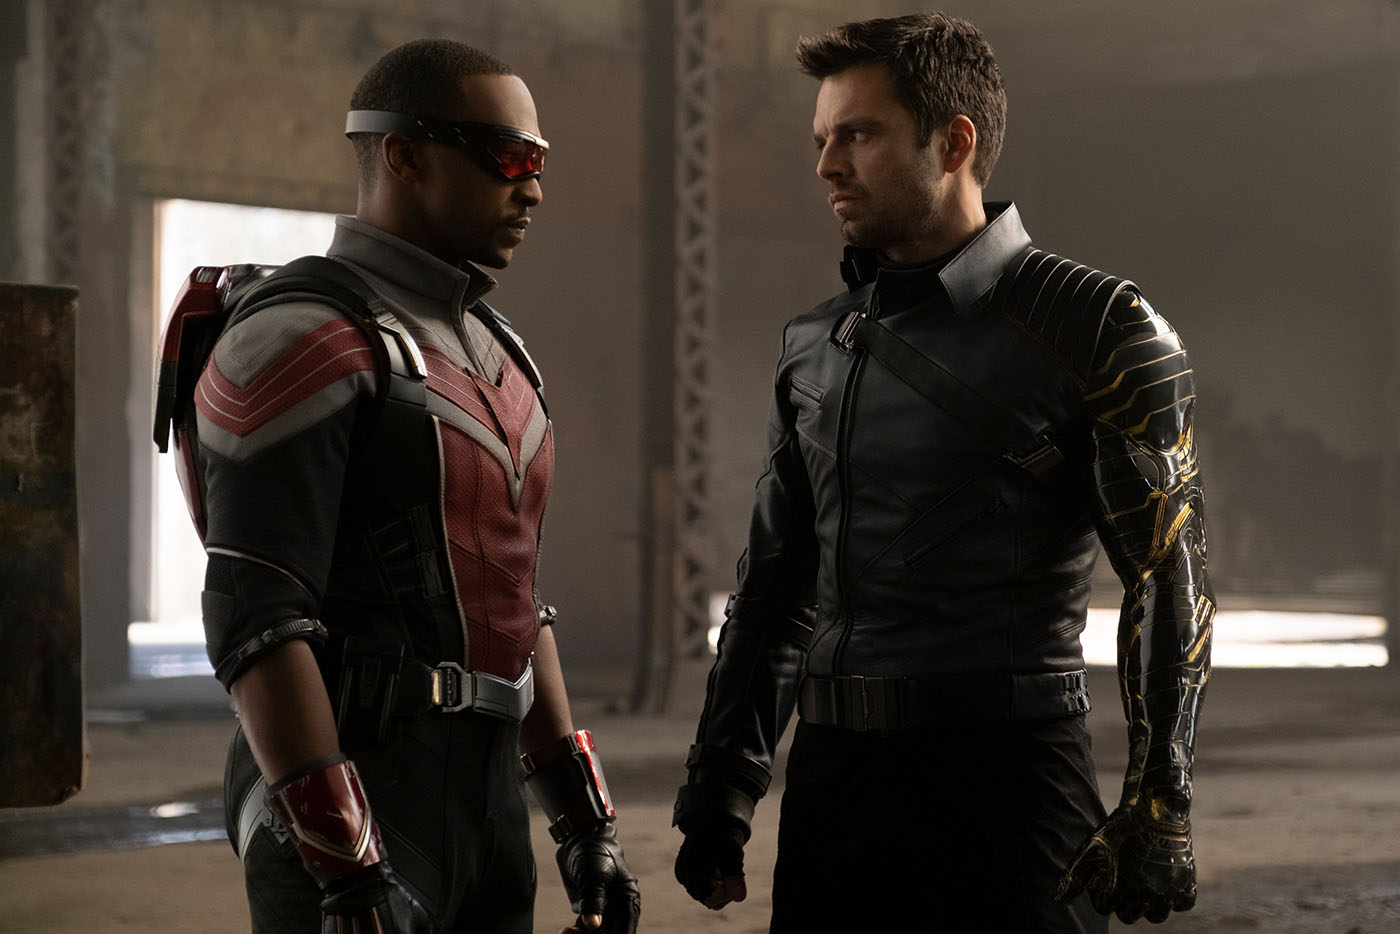 The first episode picks up six months after Avengers: Endgame. The mantle of Captain America has passed to Sam Wilson, but despite the desire of others—including Colonel James “Rhodey” Rhodes—to see him wield the shield, Sam just doesn’t feel that he, or anyone but Steve Rogers, is worthy of that role.